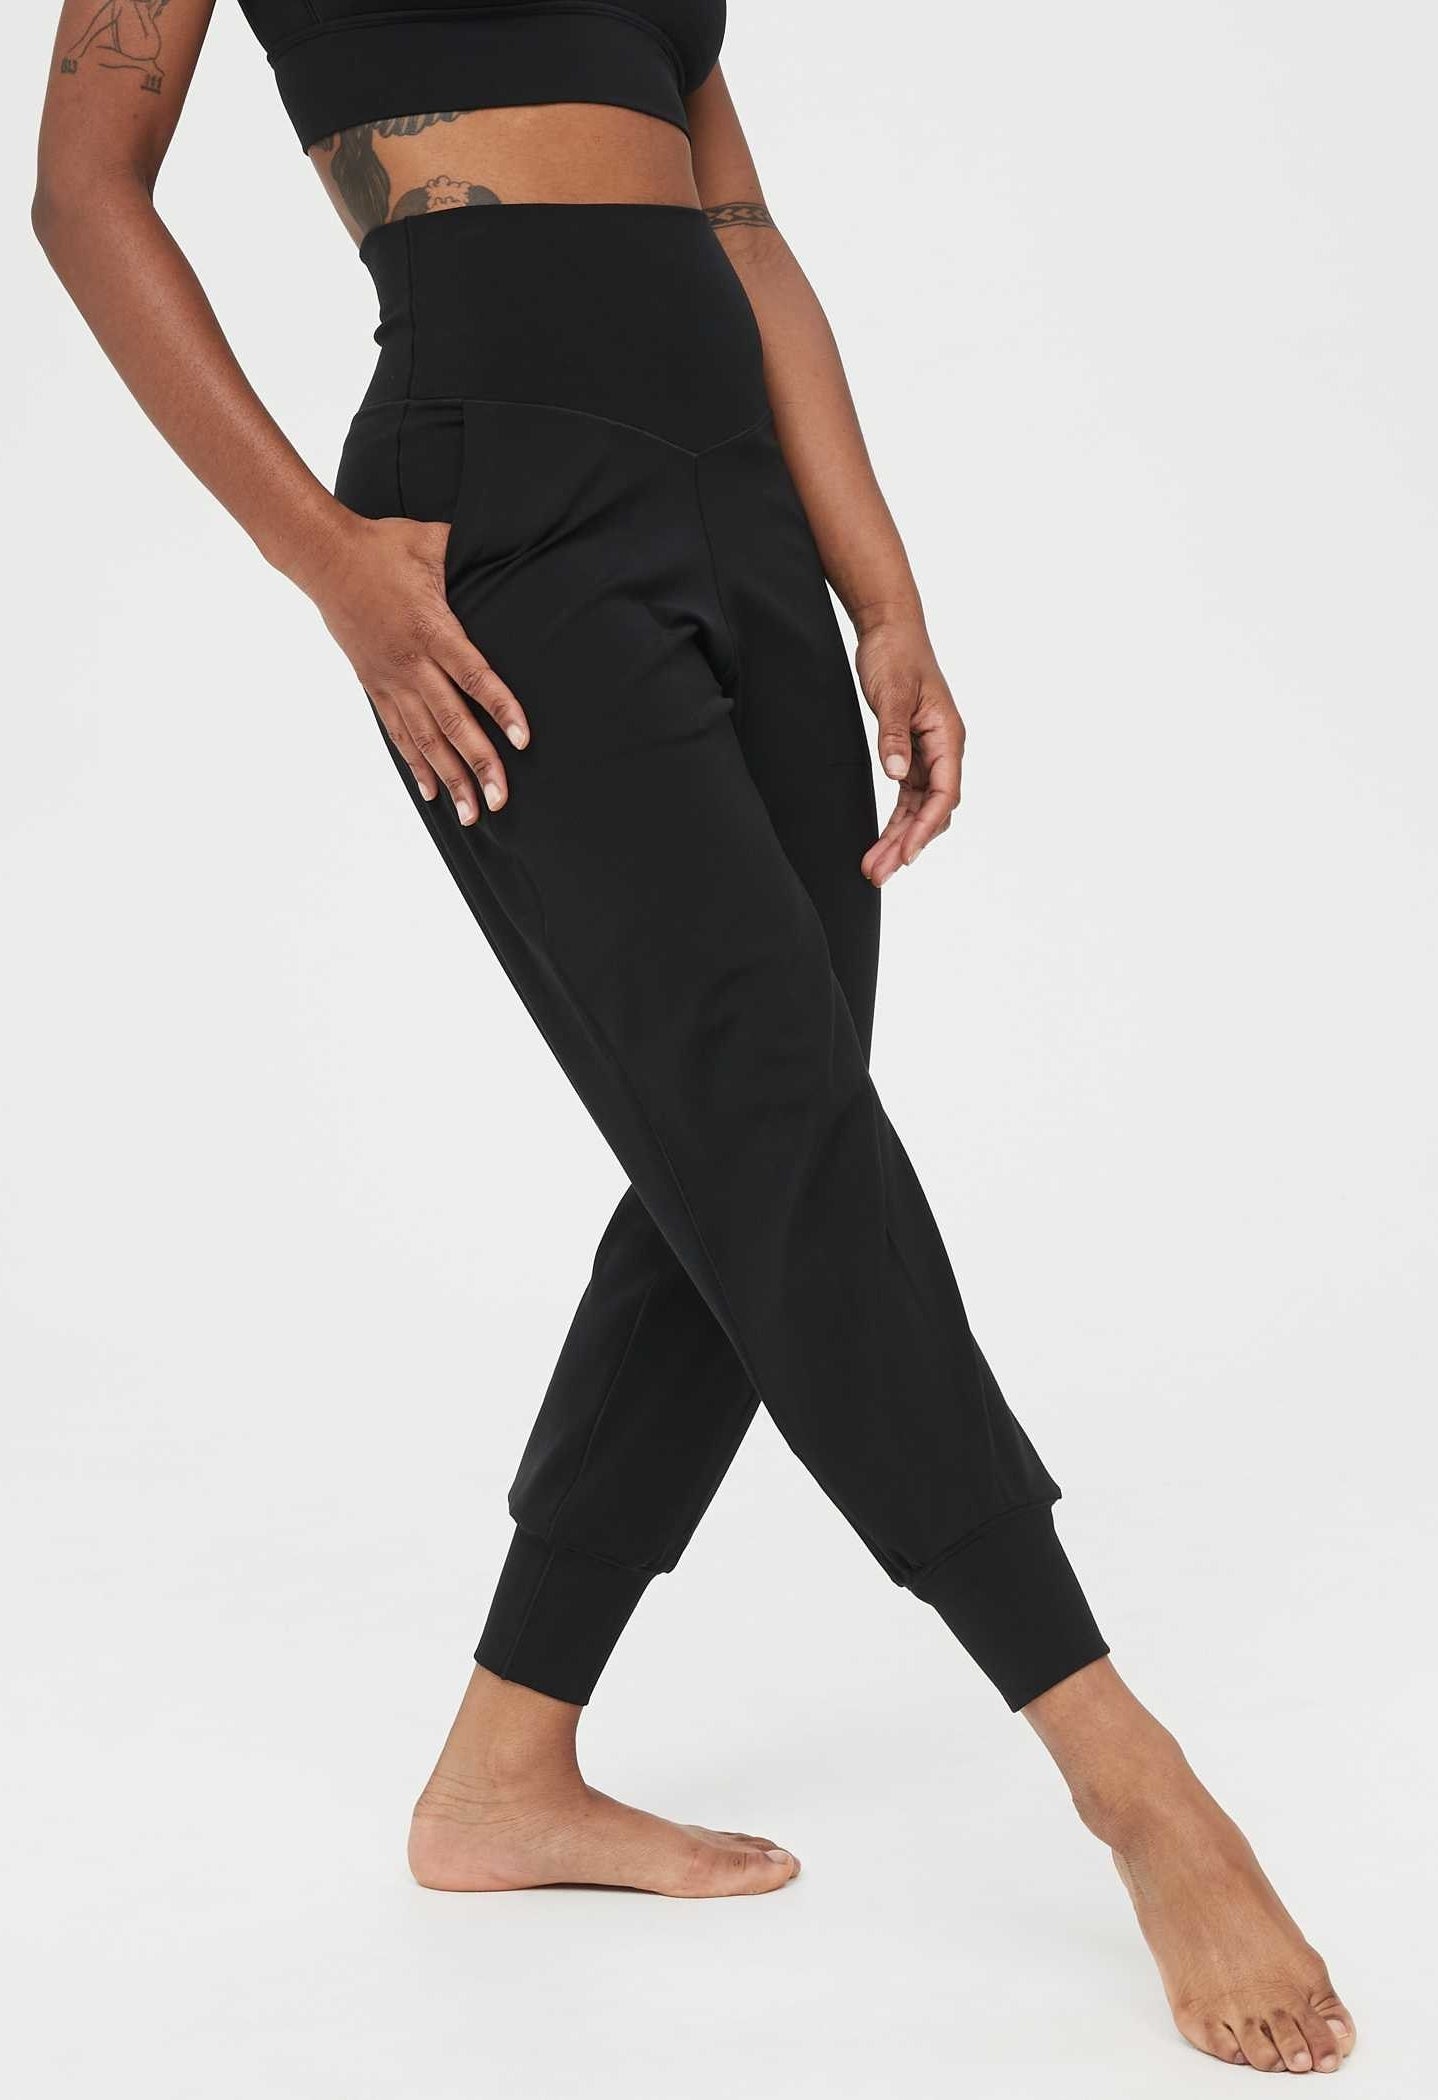 Model wearing the high-waisted joggers in black